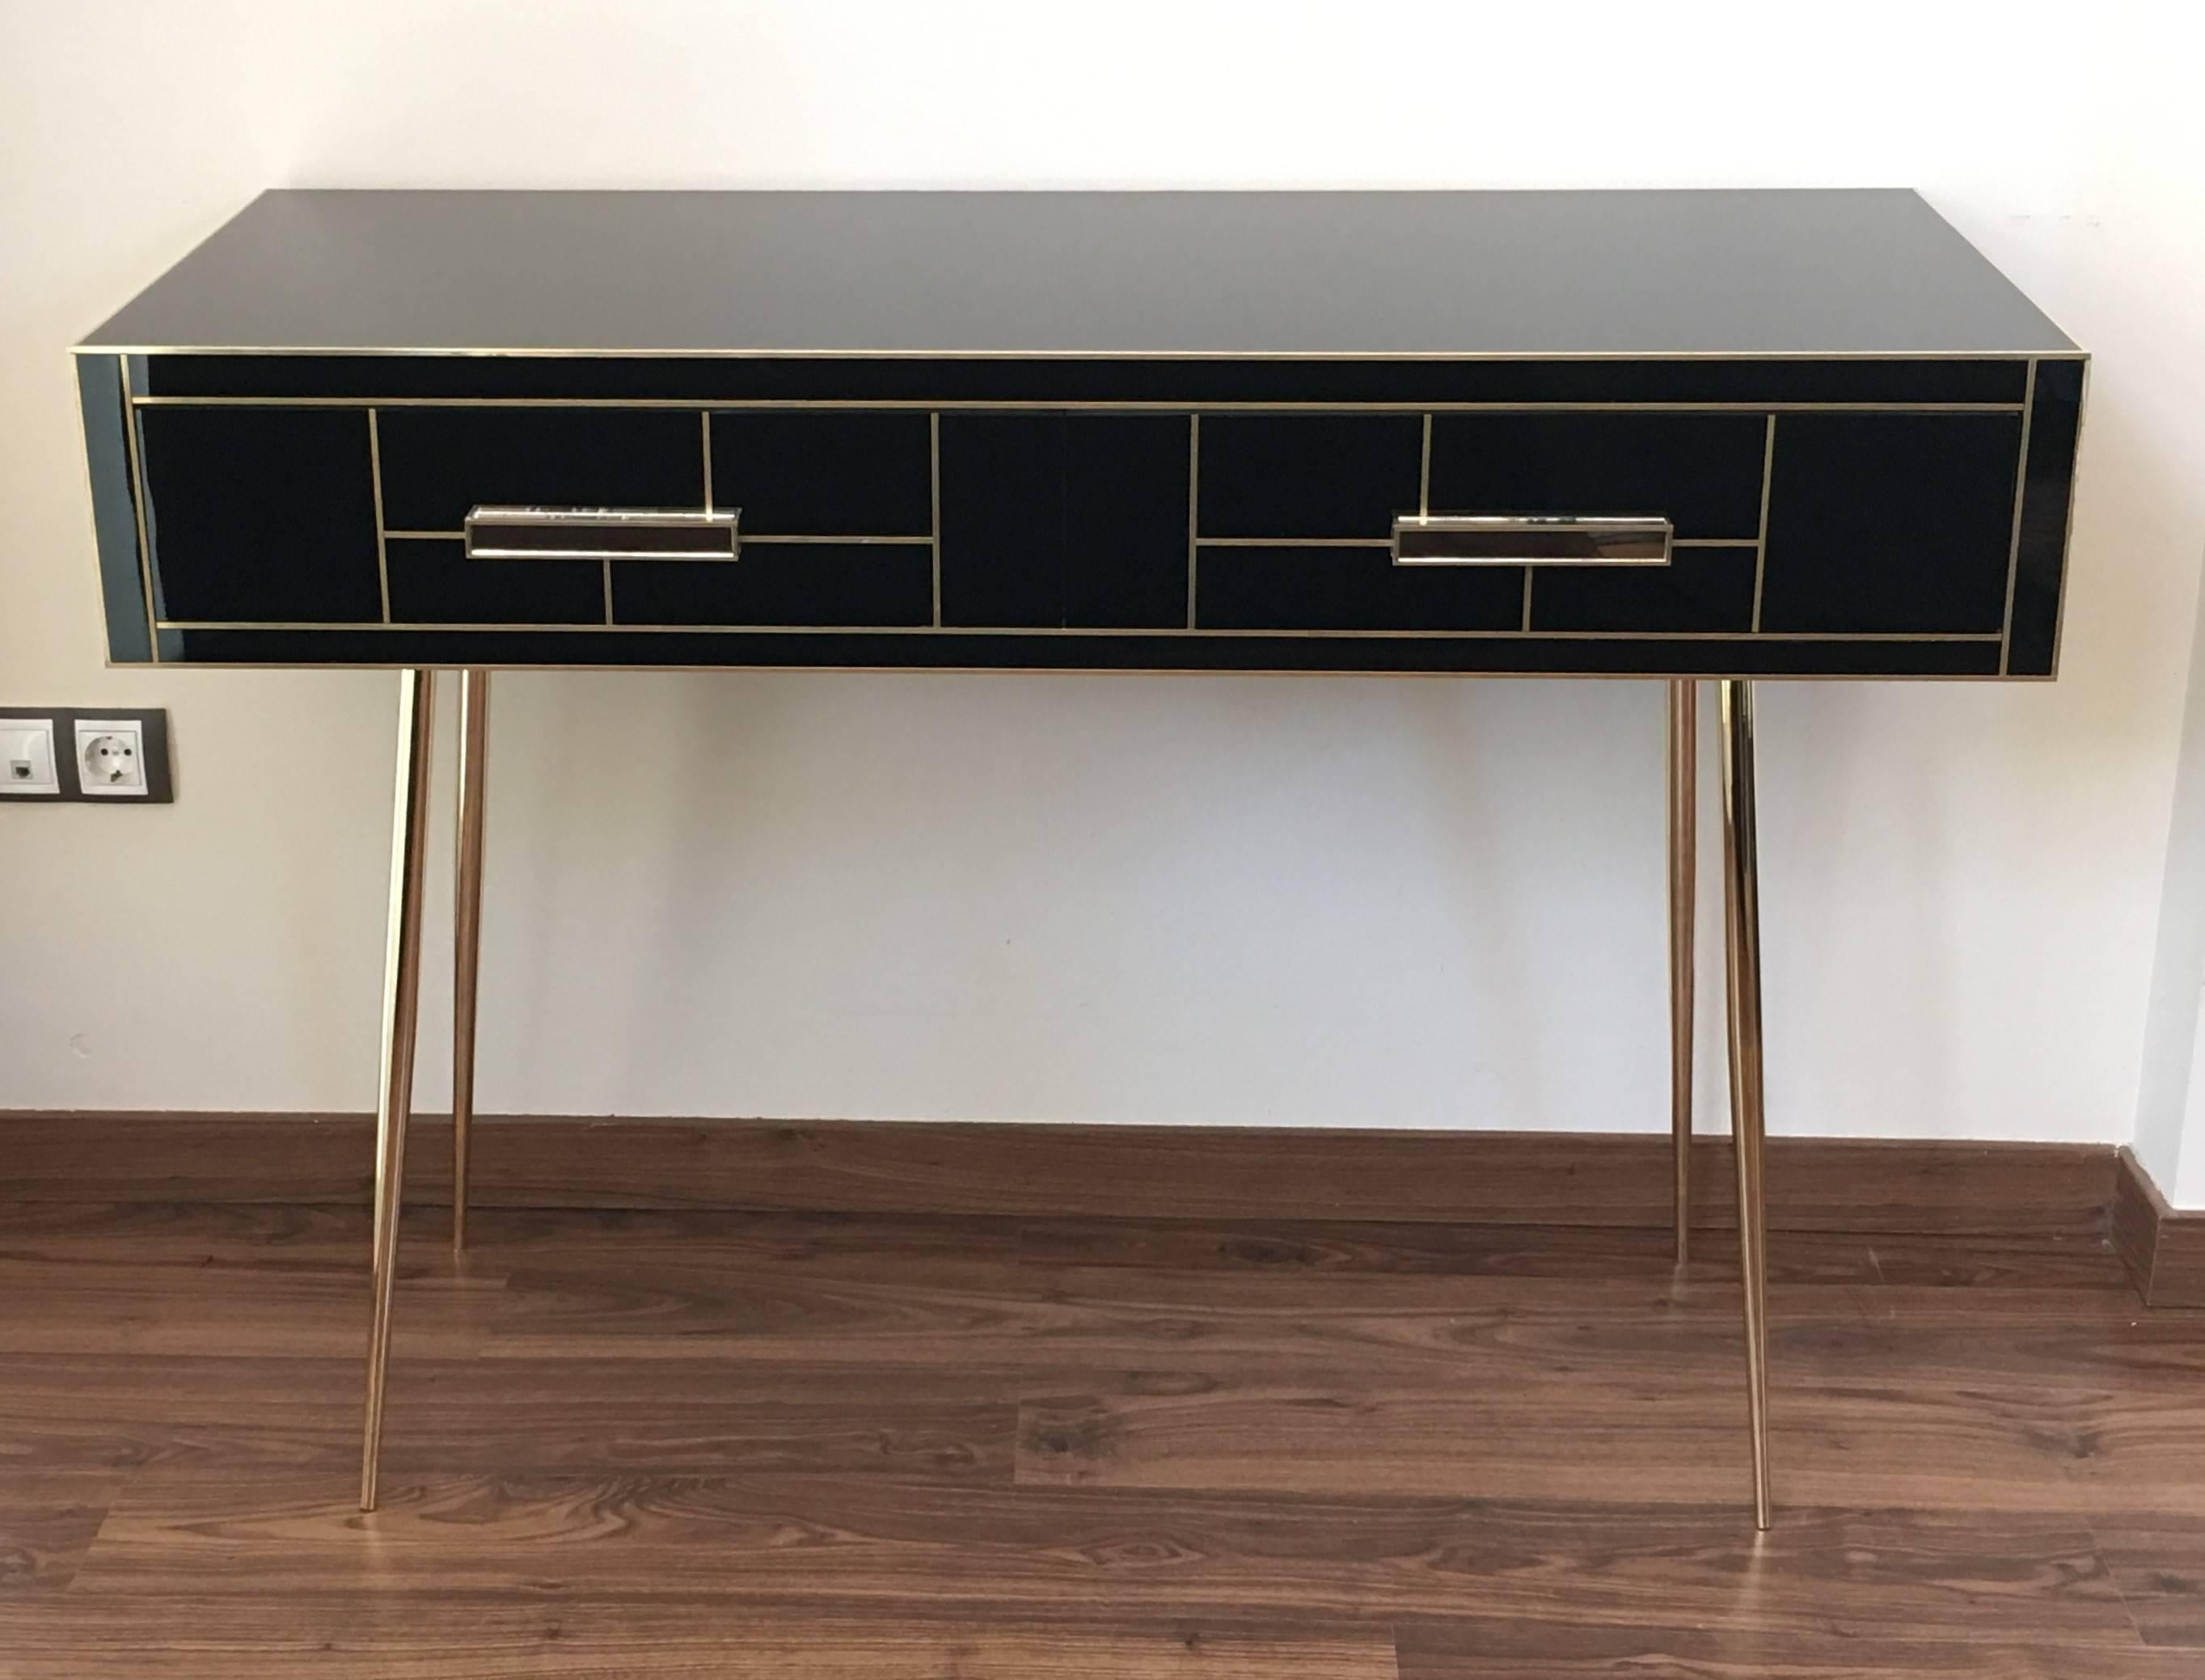 Handmade desk with two drawers with brake.
It´s also black mirrored behind.
The handles and the endless of the drawers are made in mirror.
The brass legs are very resistant’s.

Measures: Height of the leg: 25.5in.